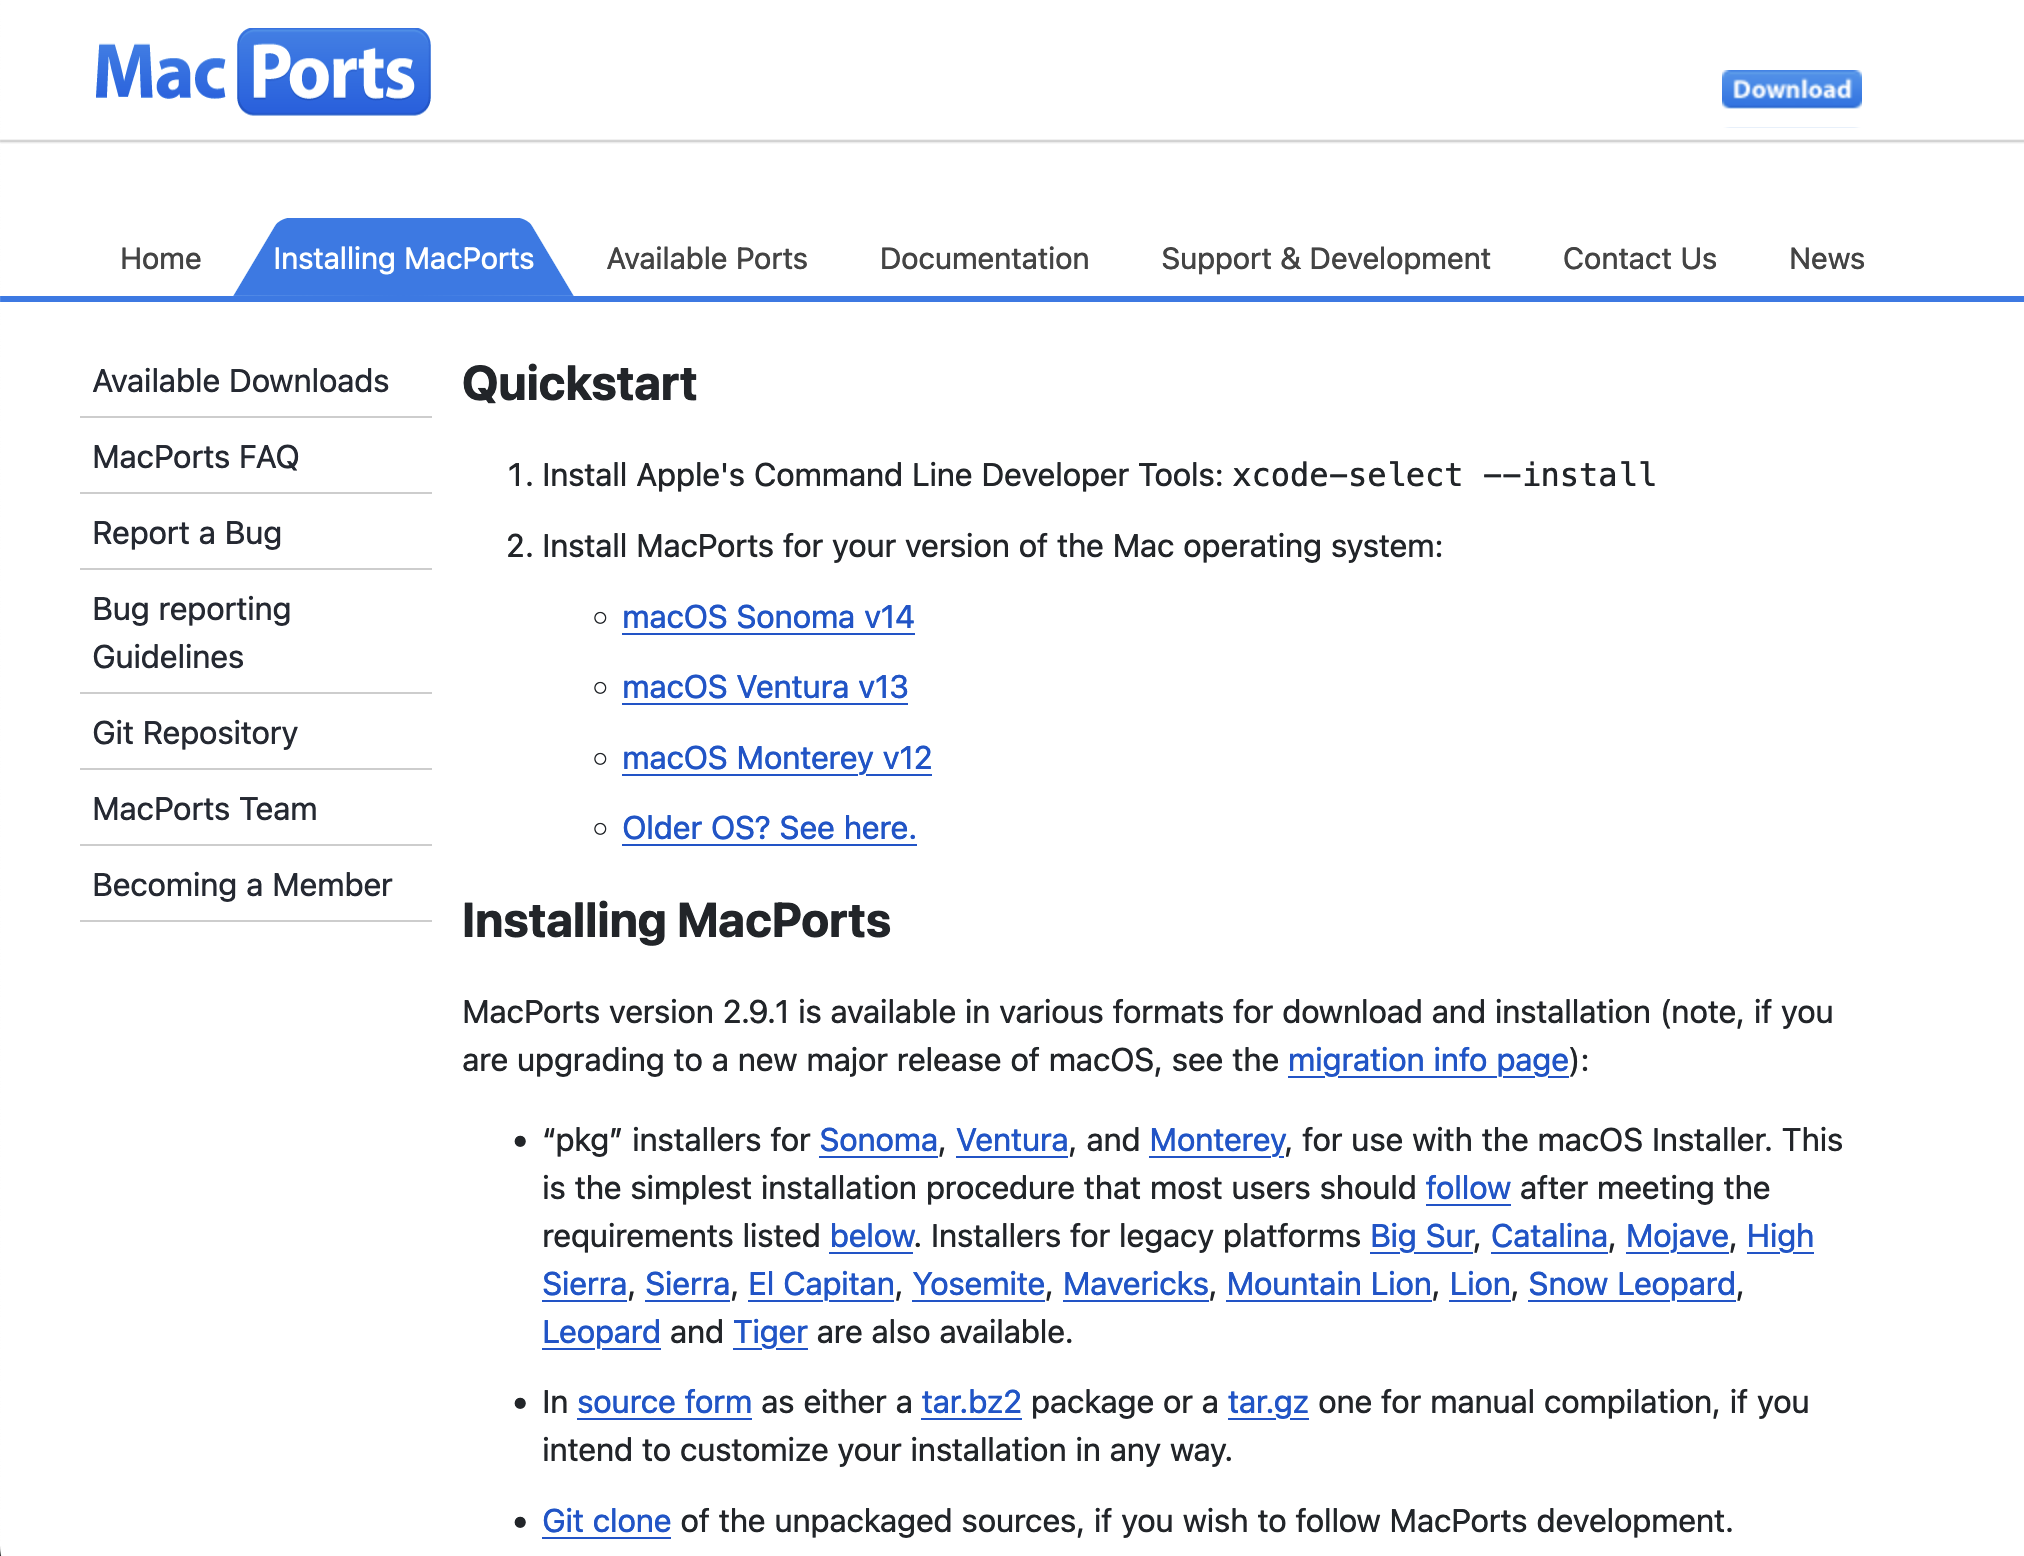 Oficial Installation Webpage of MacPorts